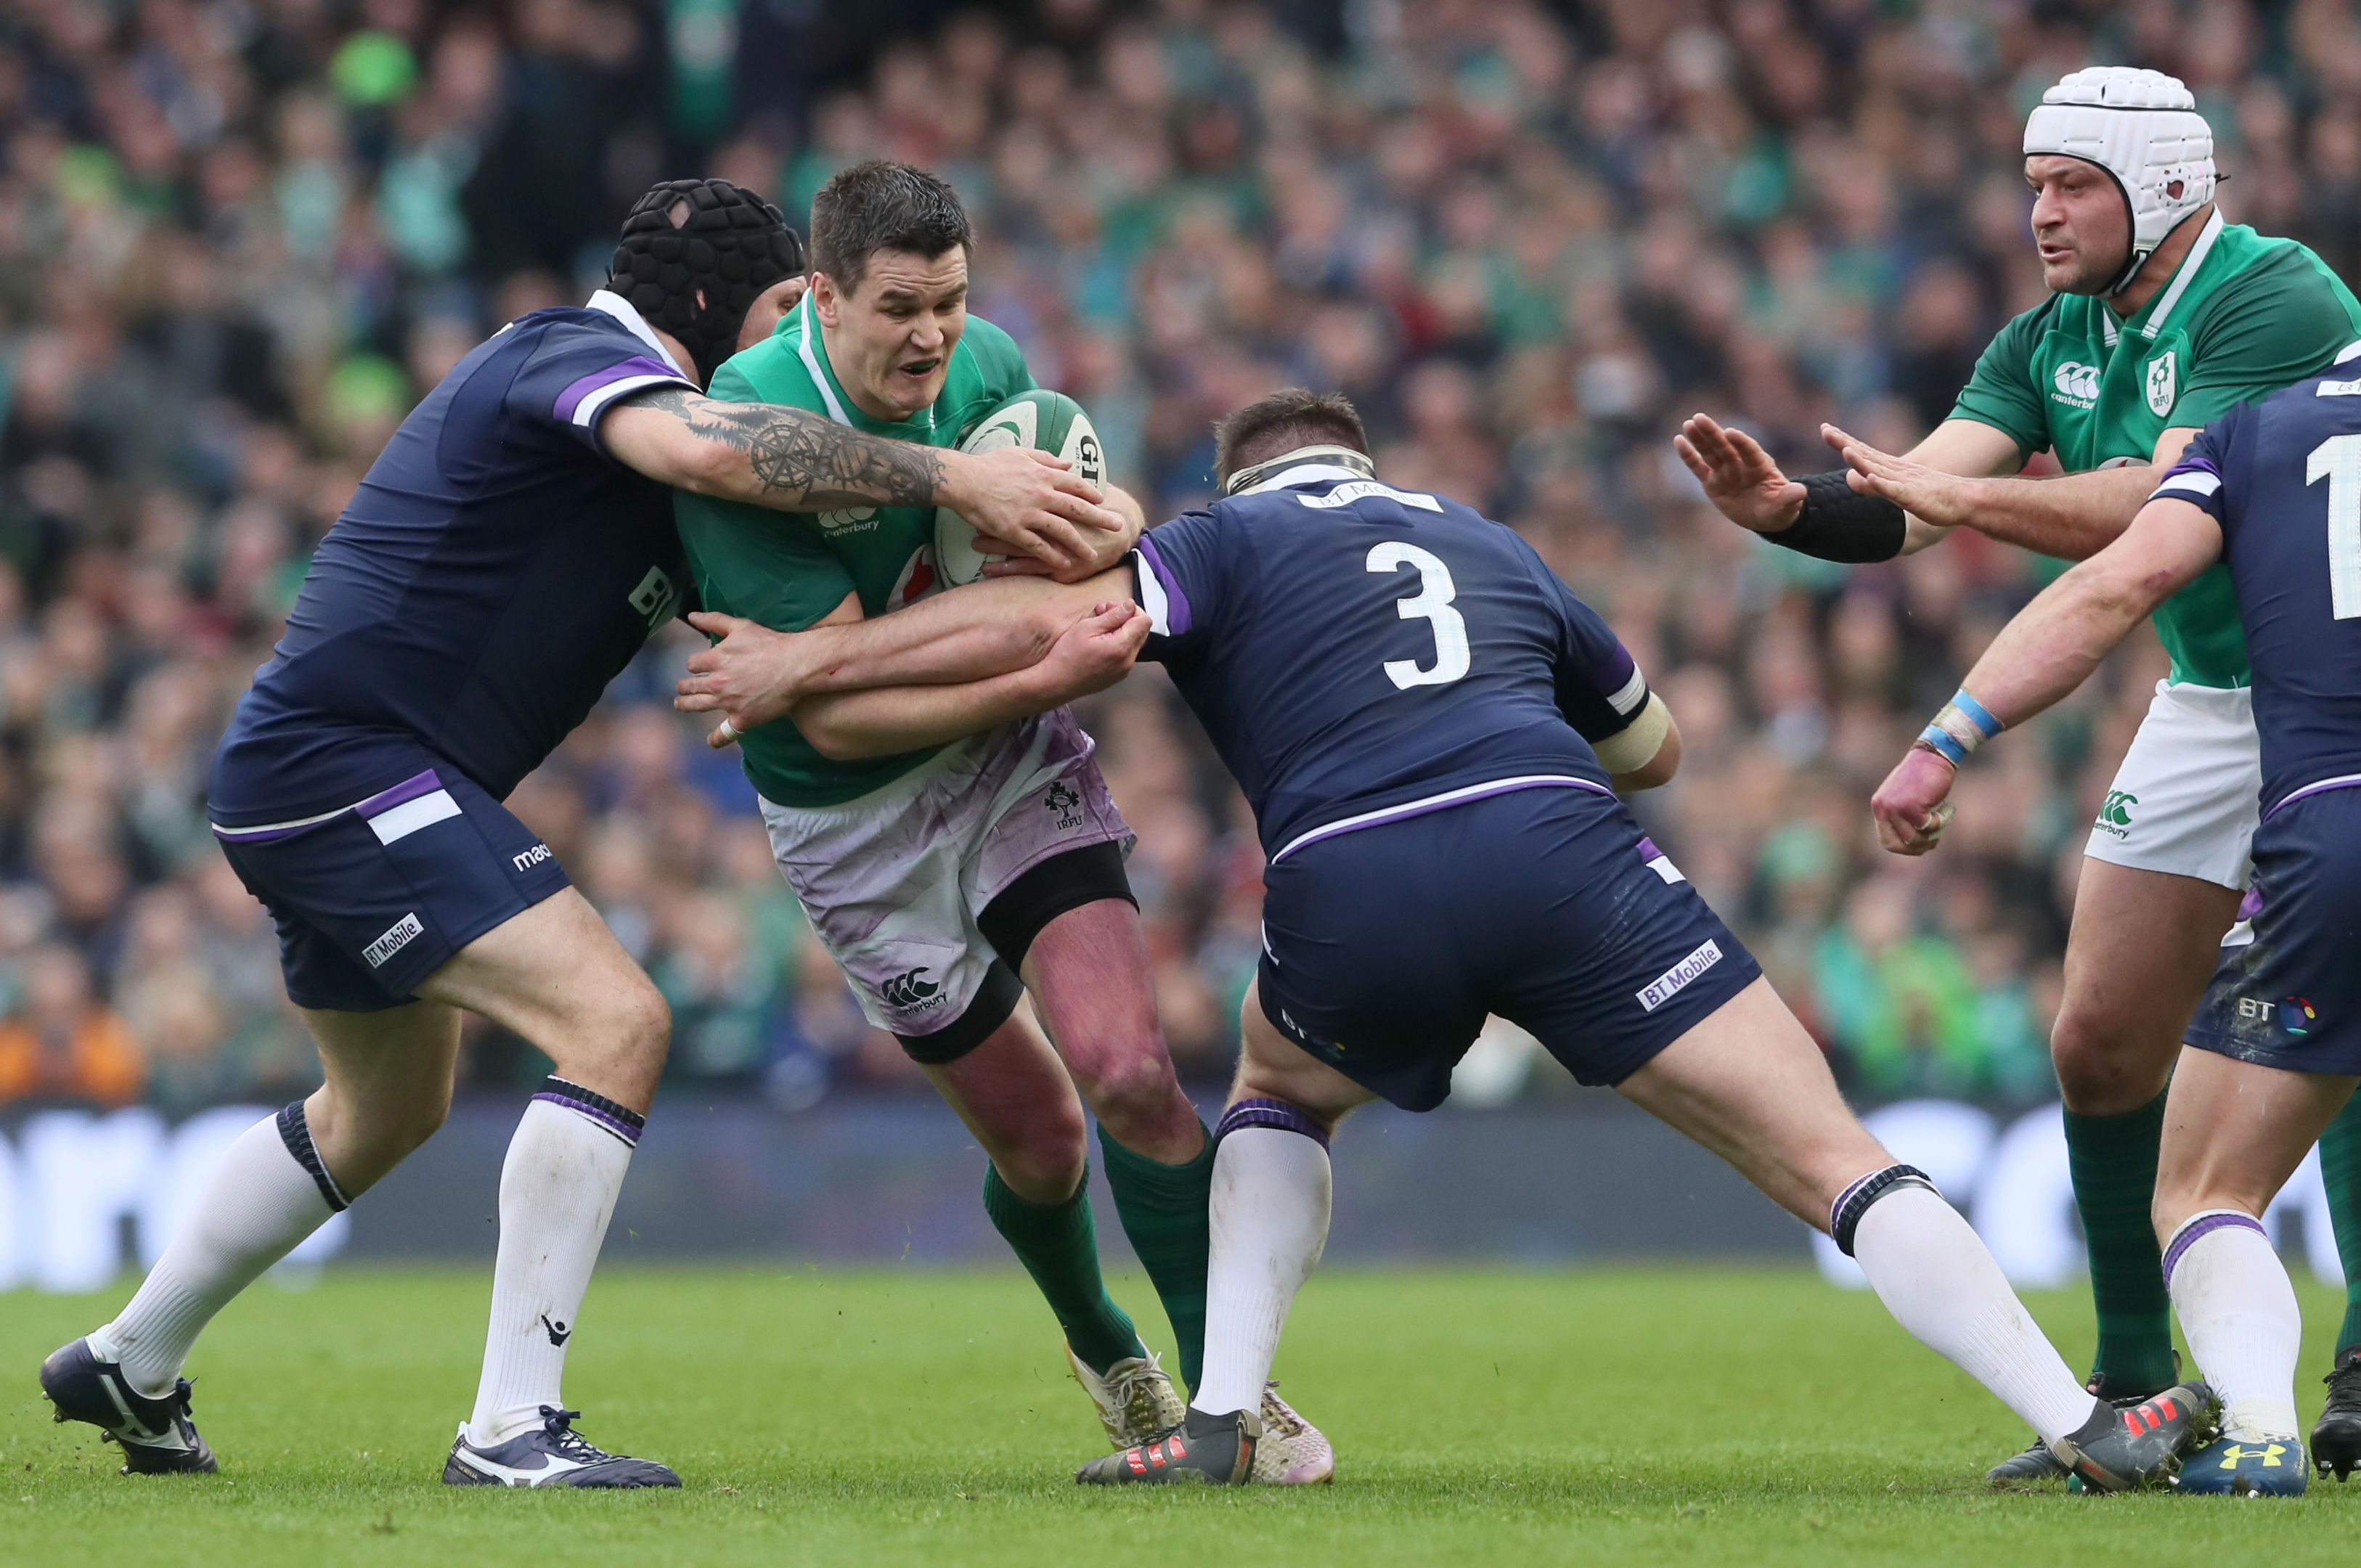 Johnny Sexton is tackled by Gordon Reid and Simon Berghan during Saturday's game in Dublin.